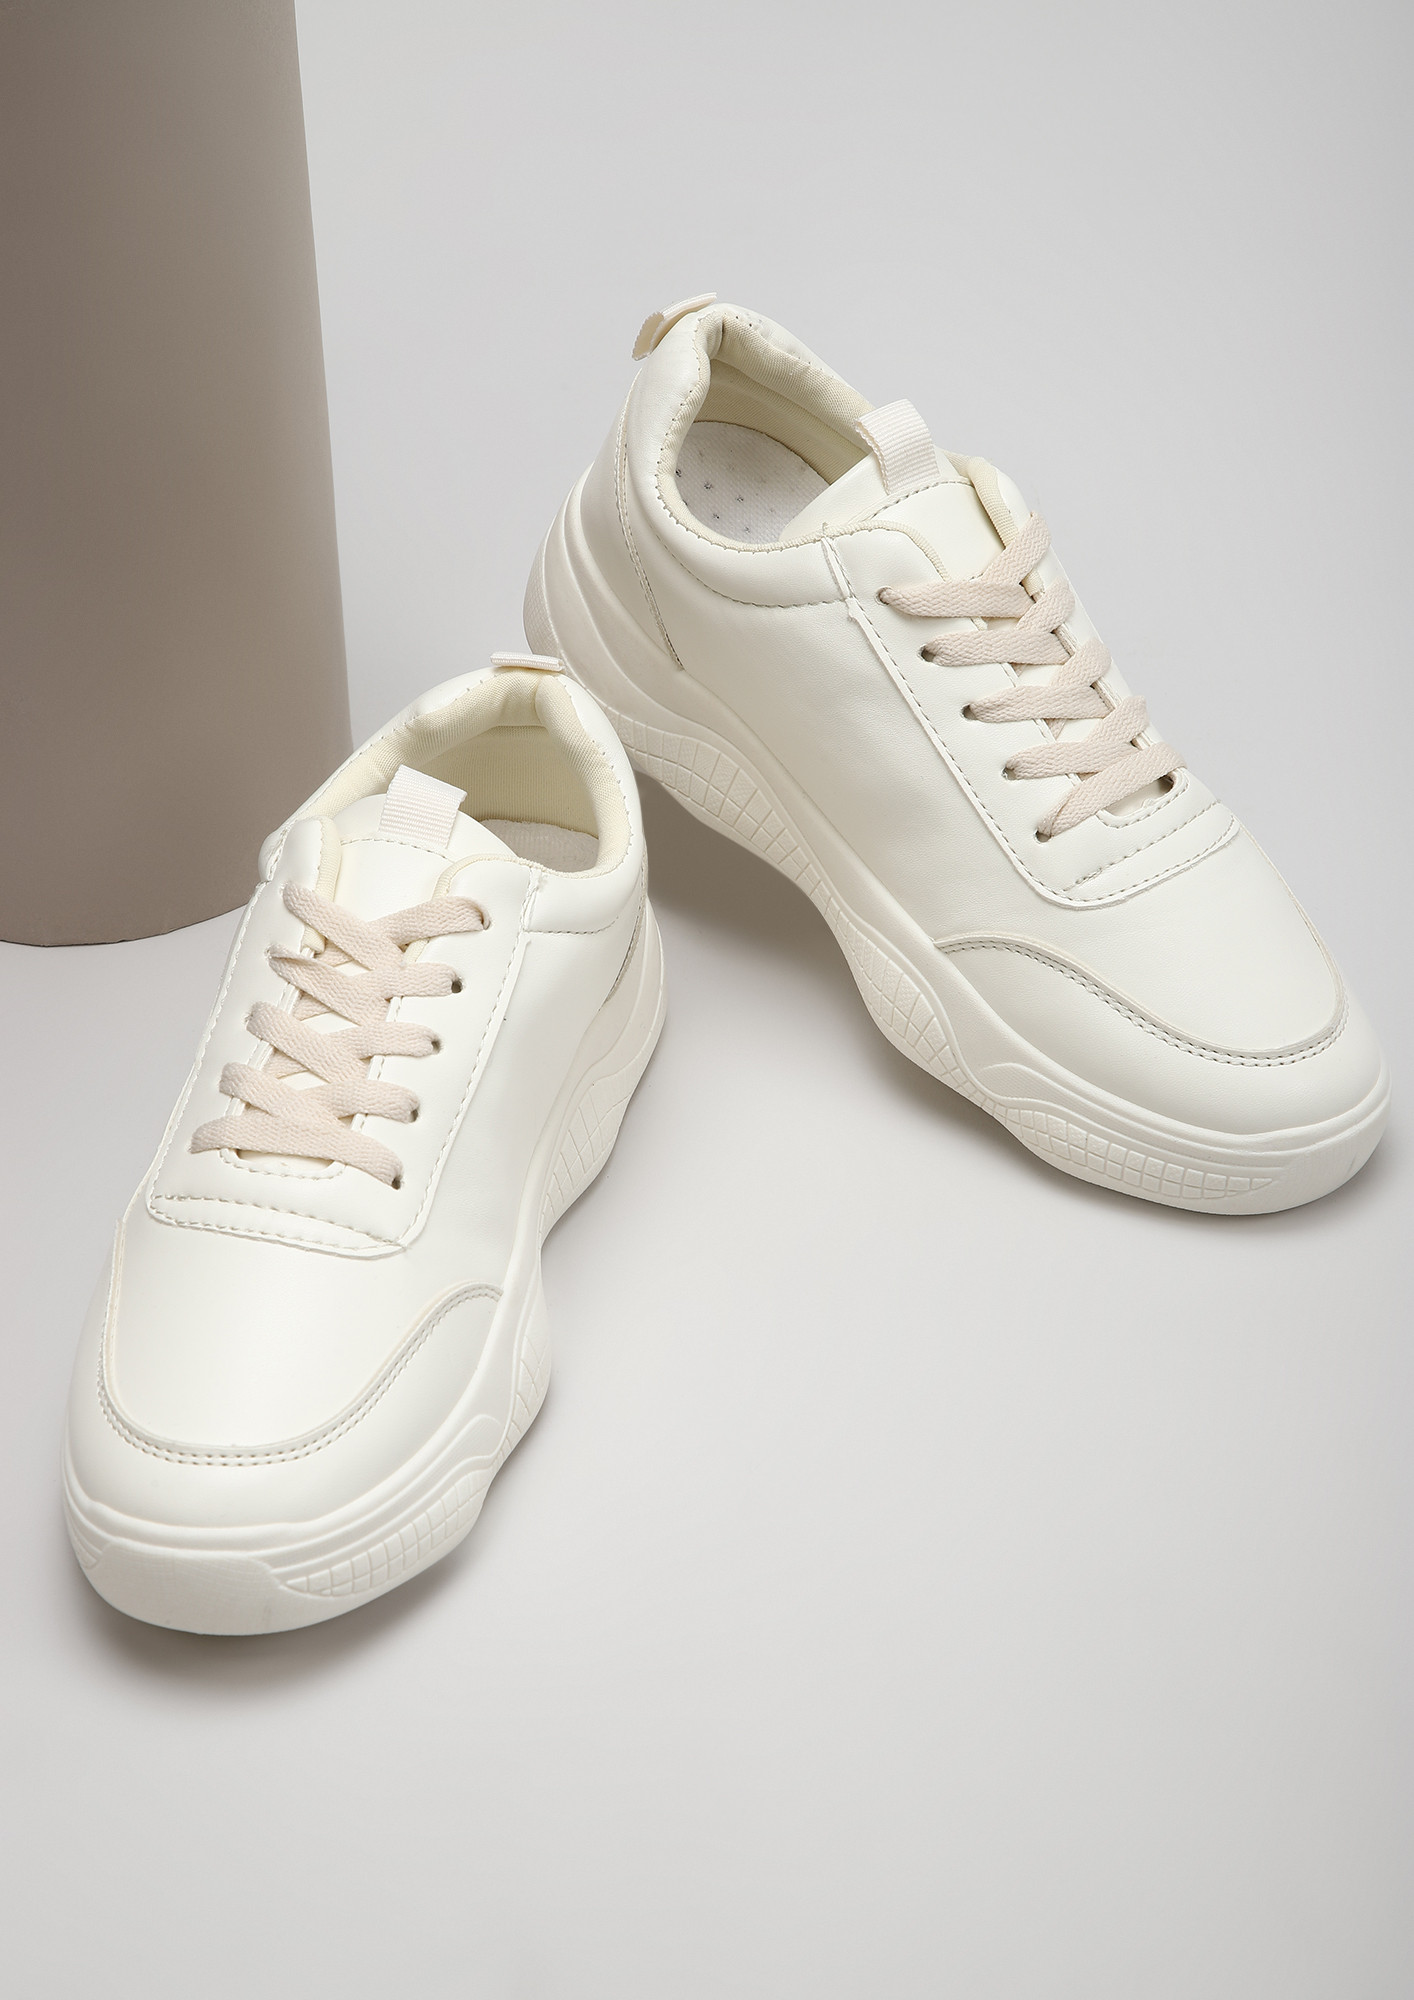 GOOD OLD-SCHOOL VIBES BEIGE TRAINERS